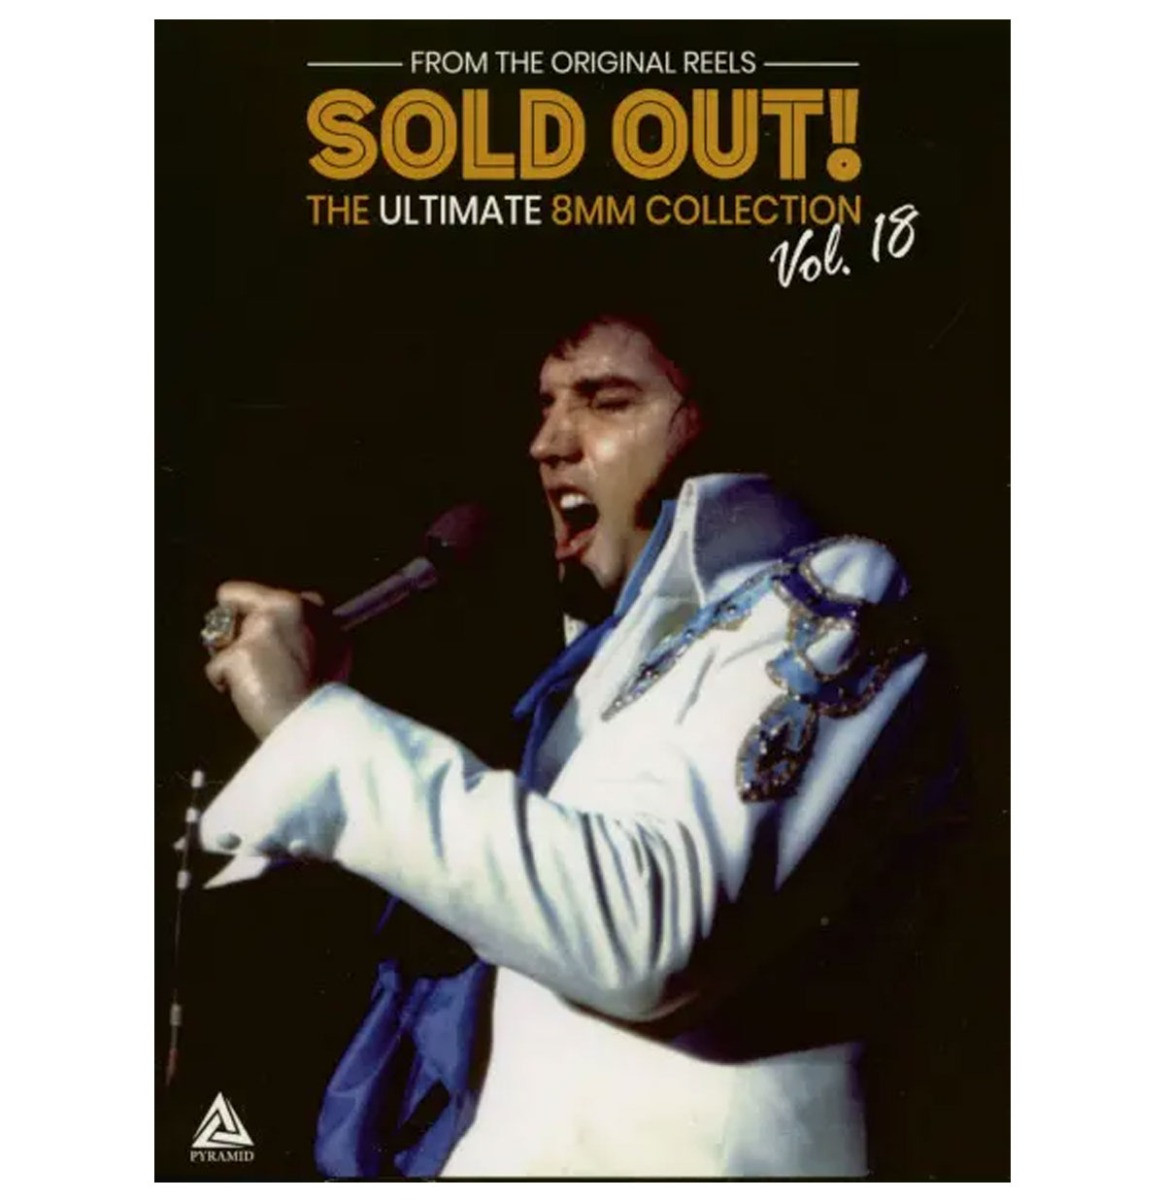 Elvis Presley: Sold Out! The Ultimate 8MM Collection Vol. 18 - 2 DVD Set